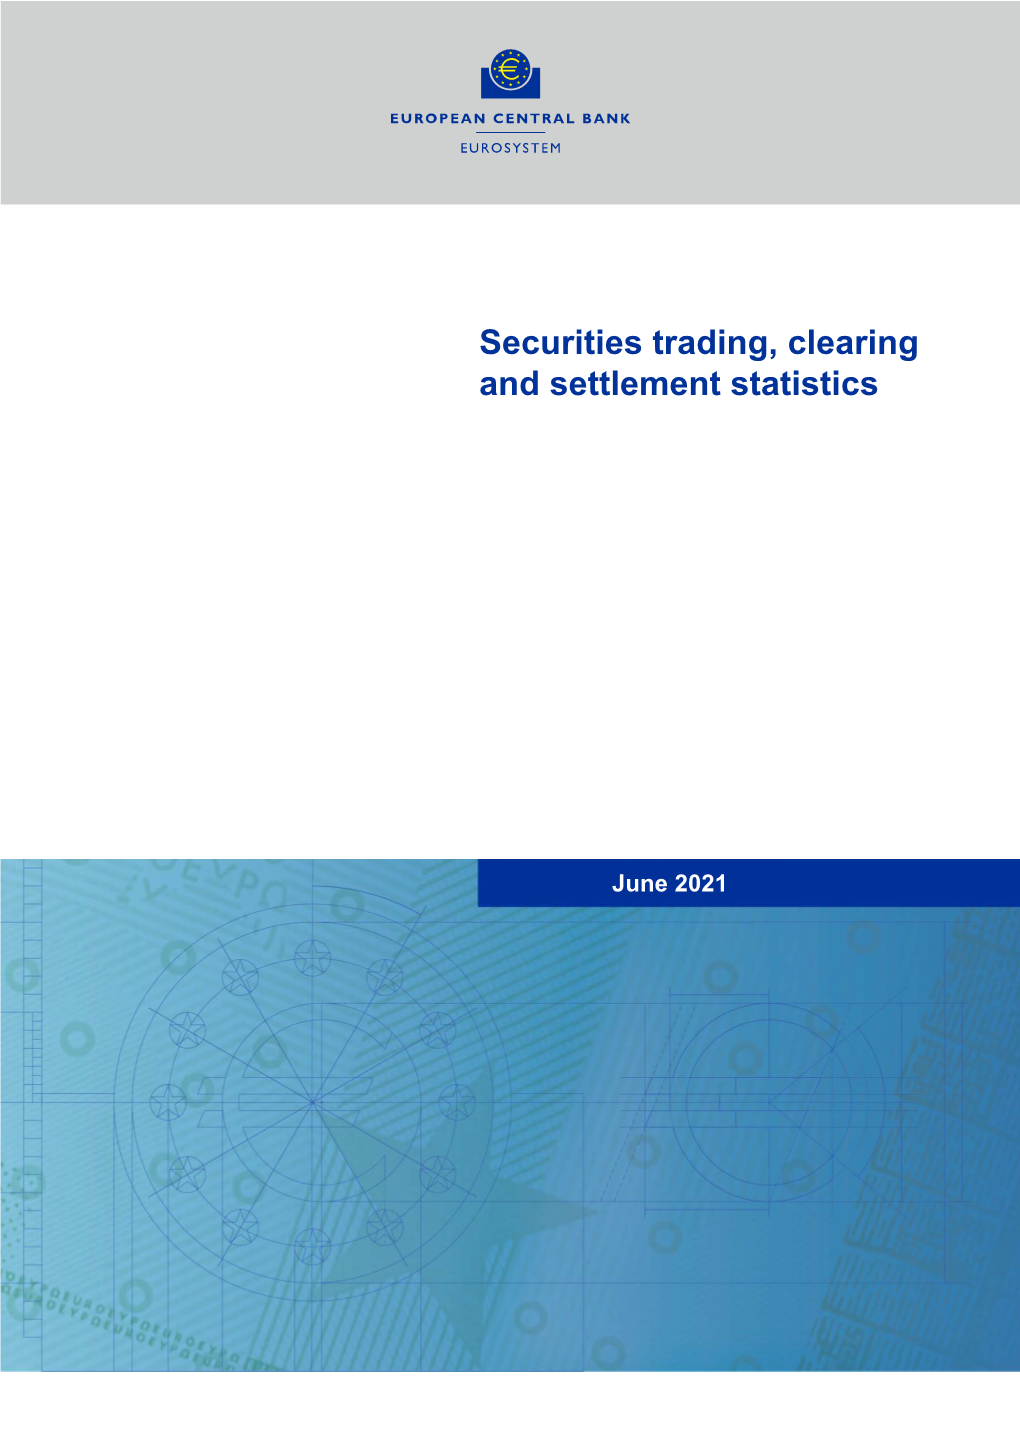 Securities Trading, Clearing and Settlement Statistics